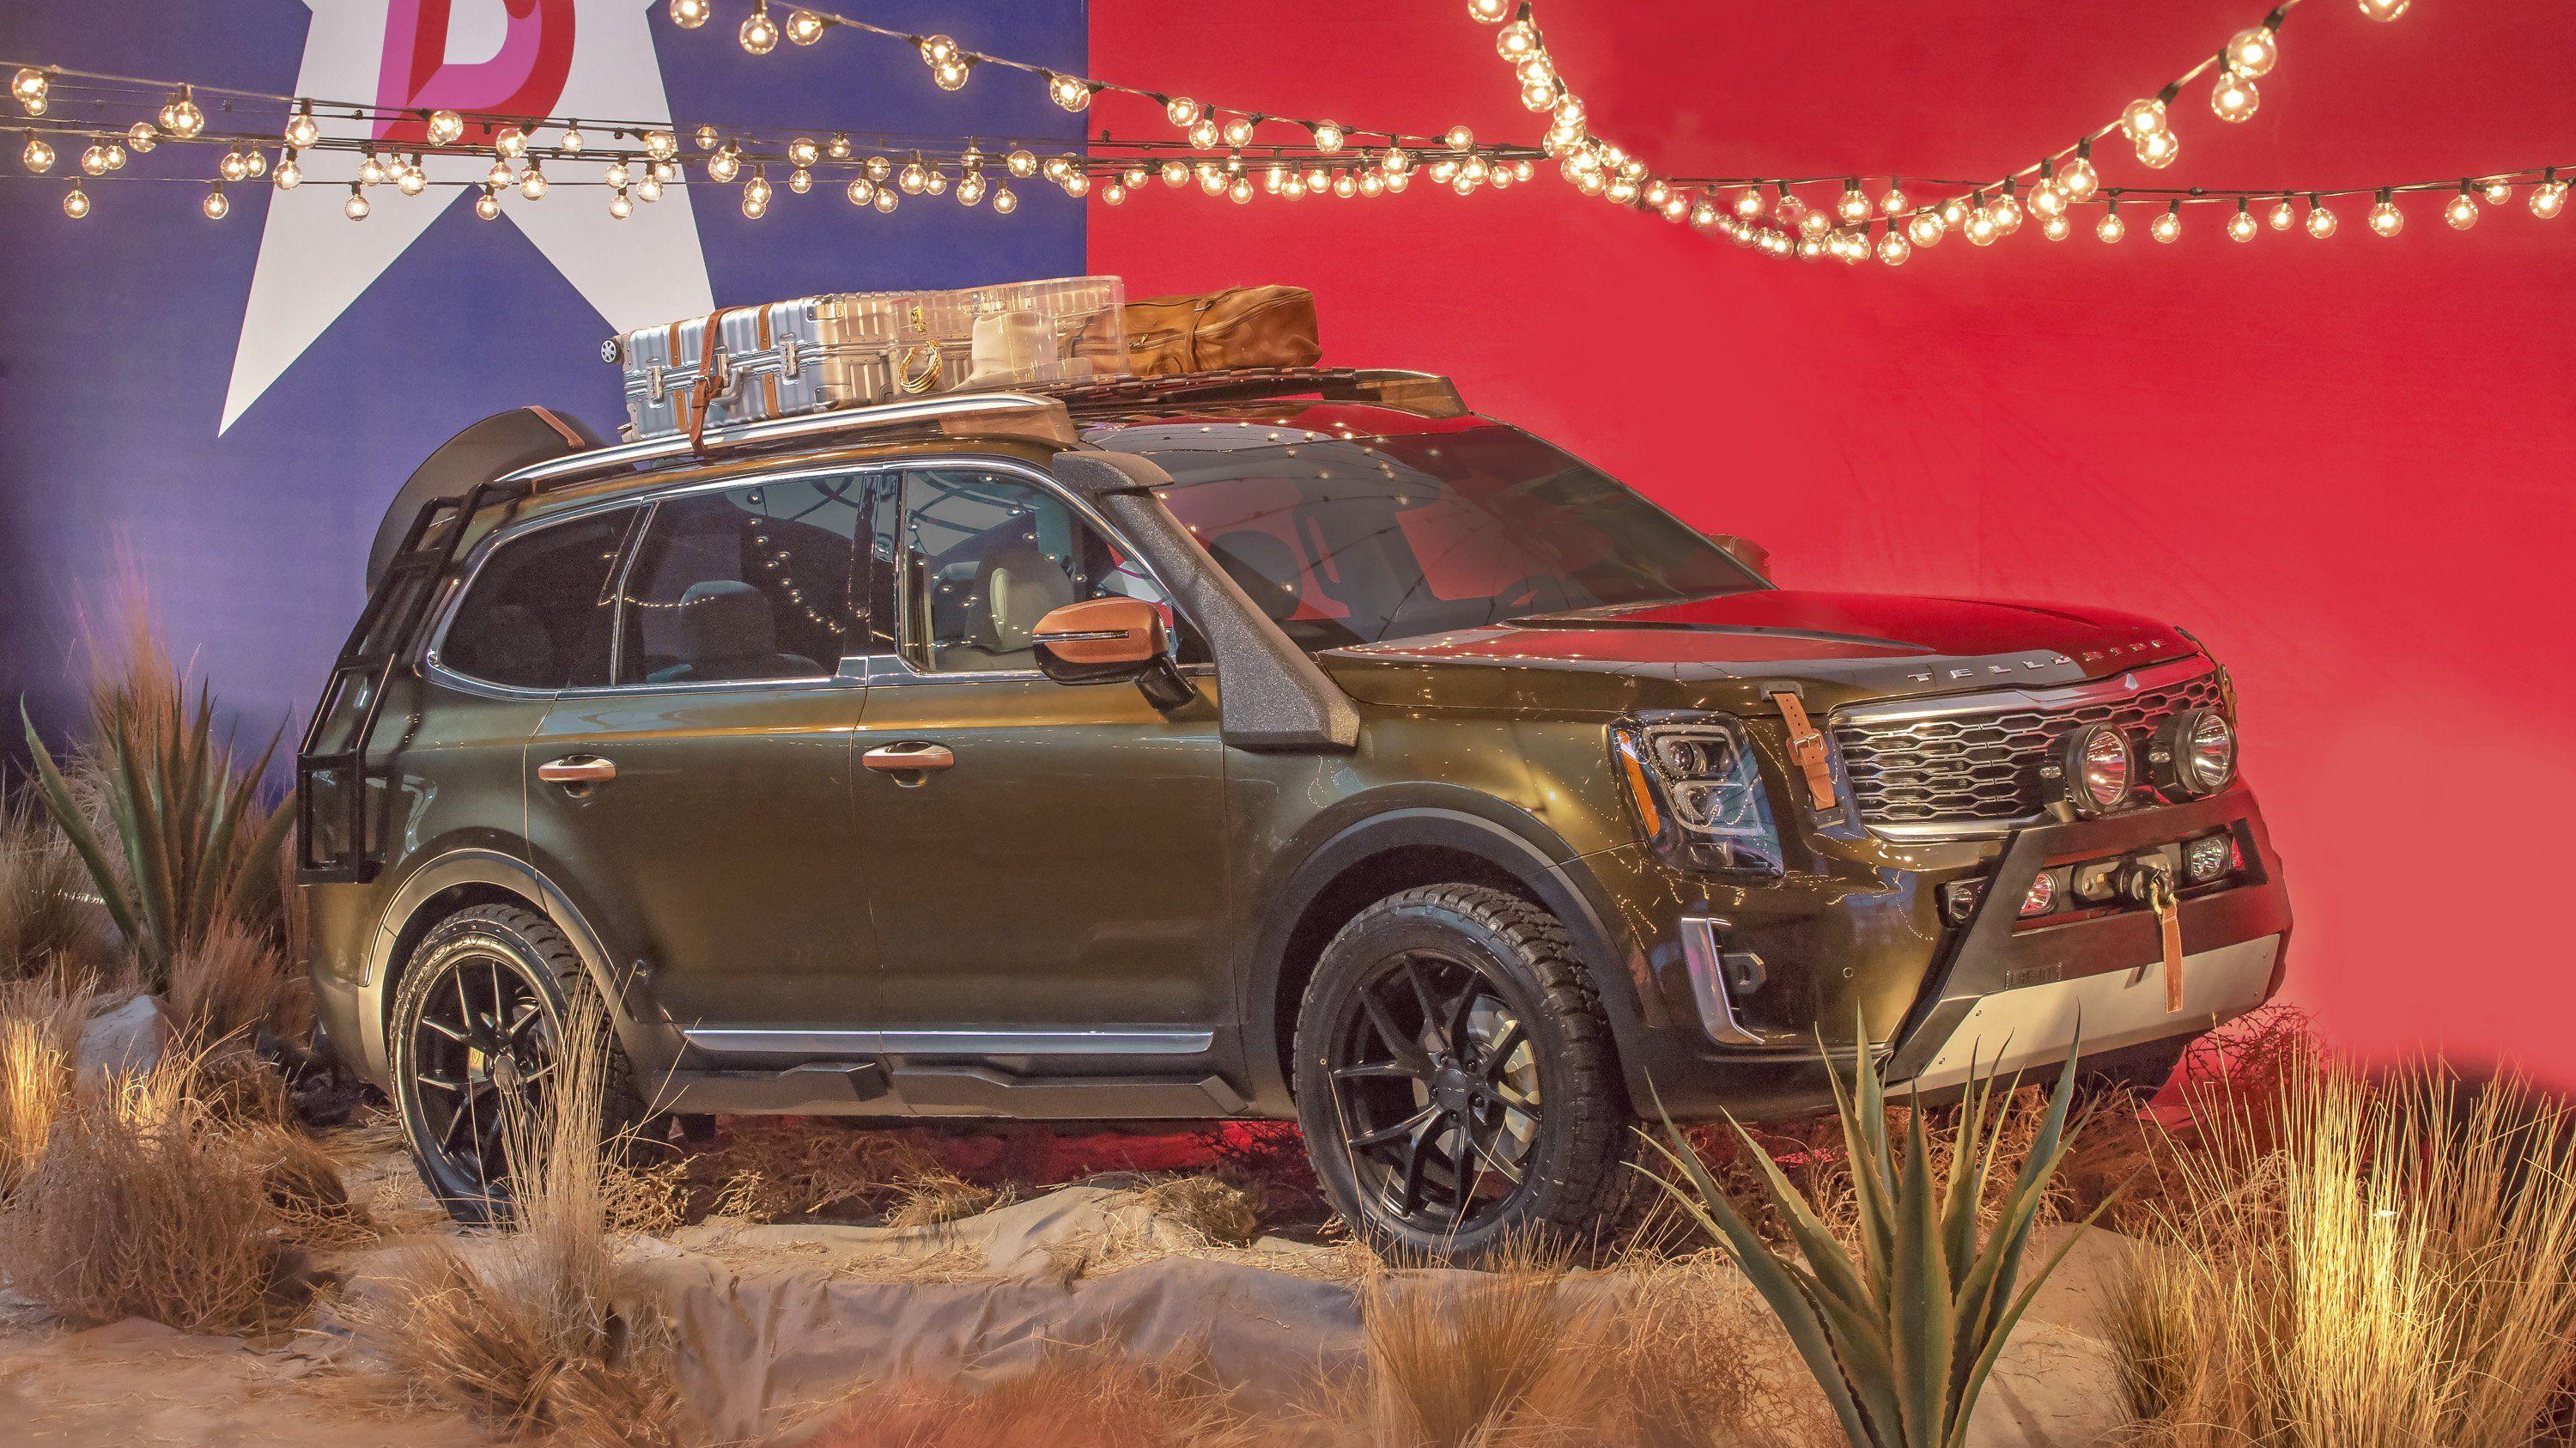 The Kia Telluride Debuts Looking More Like A Concept Than A